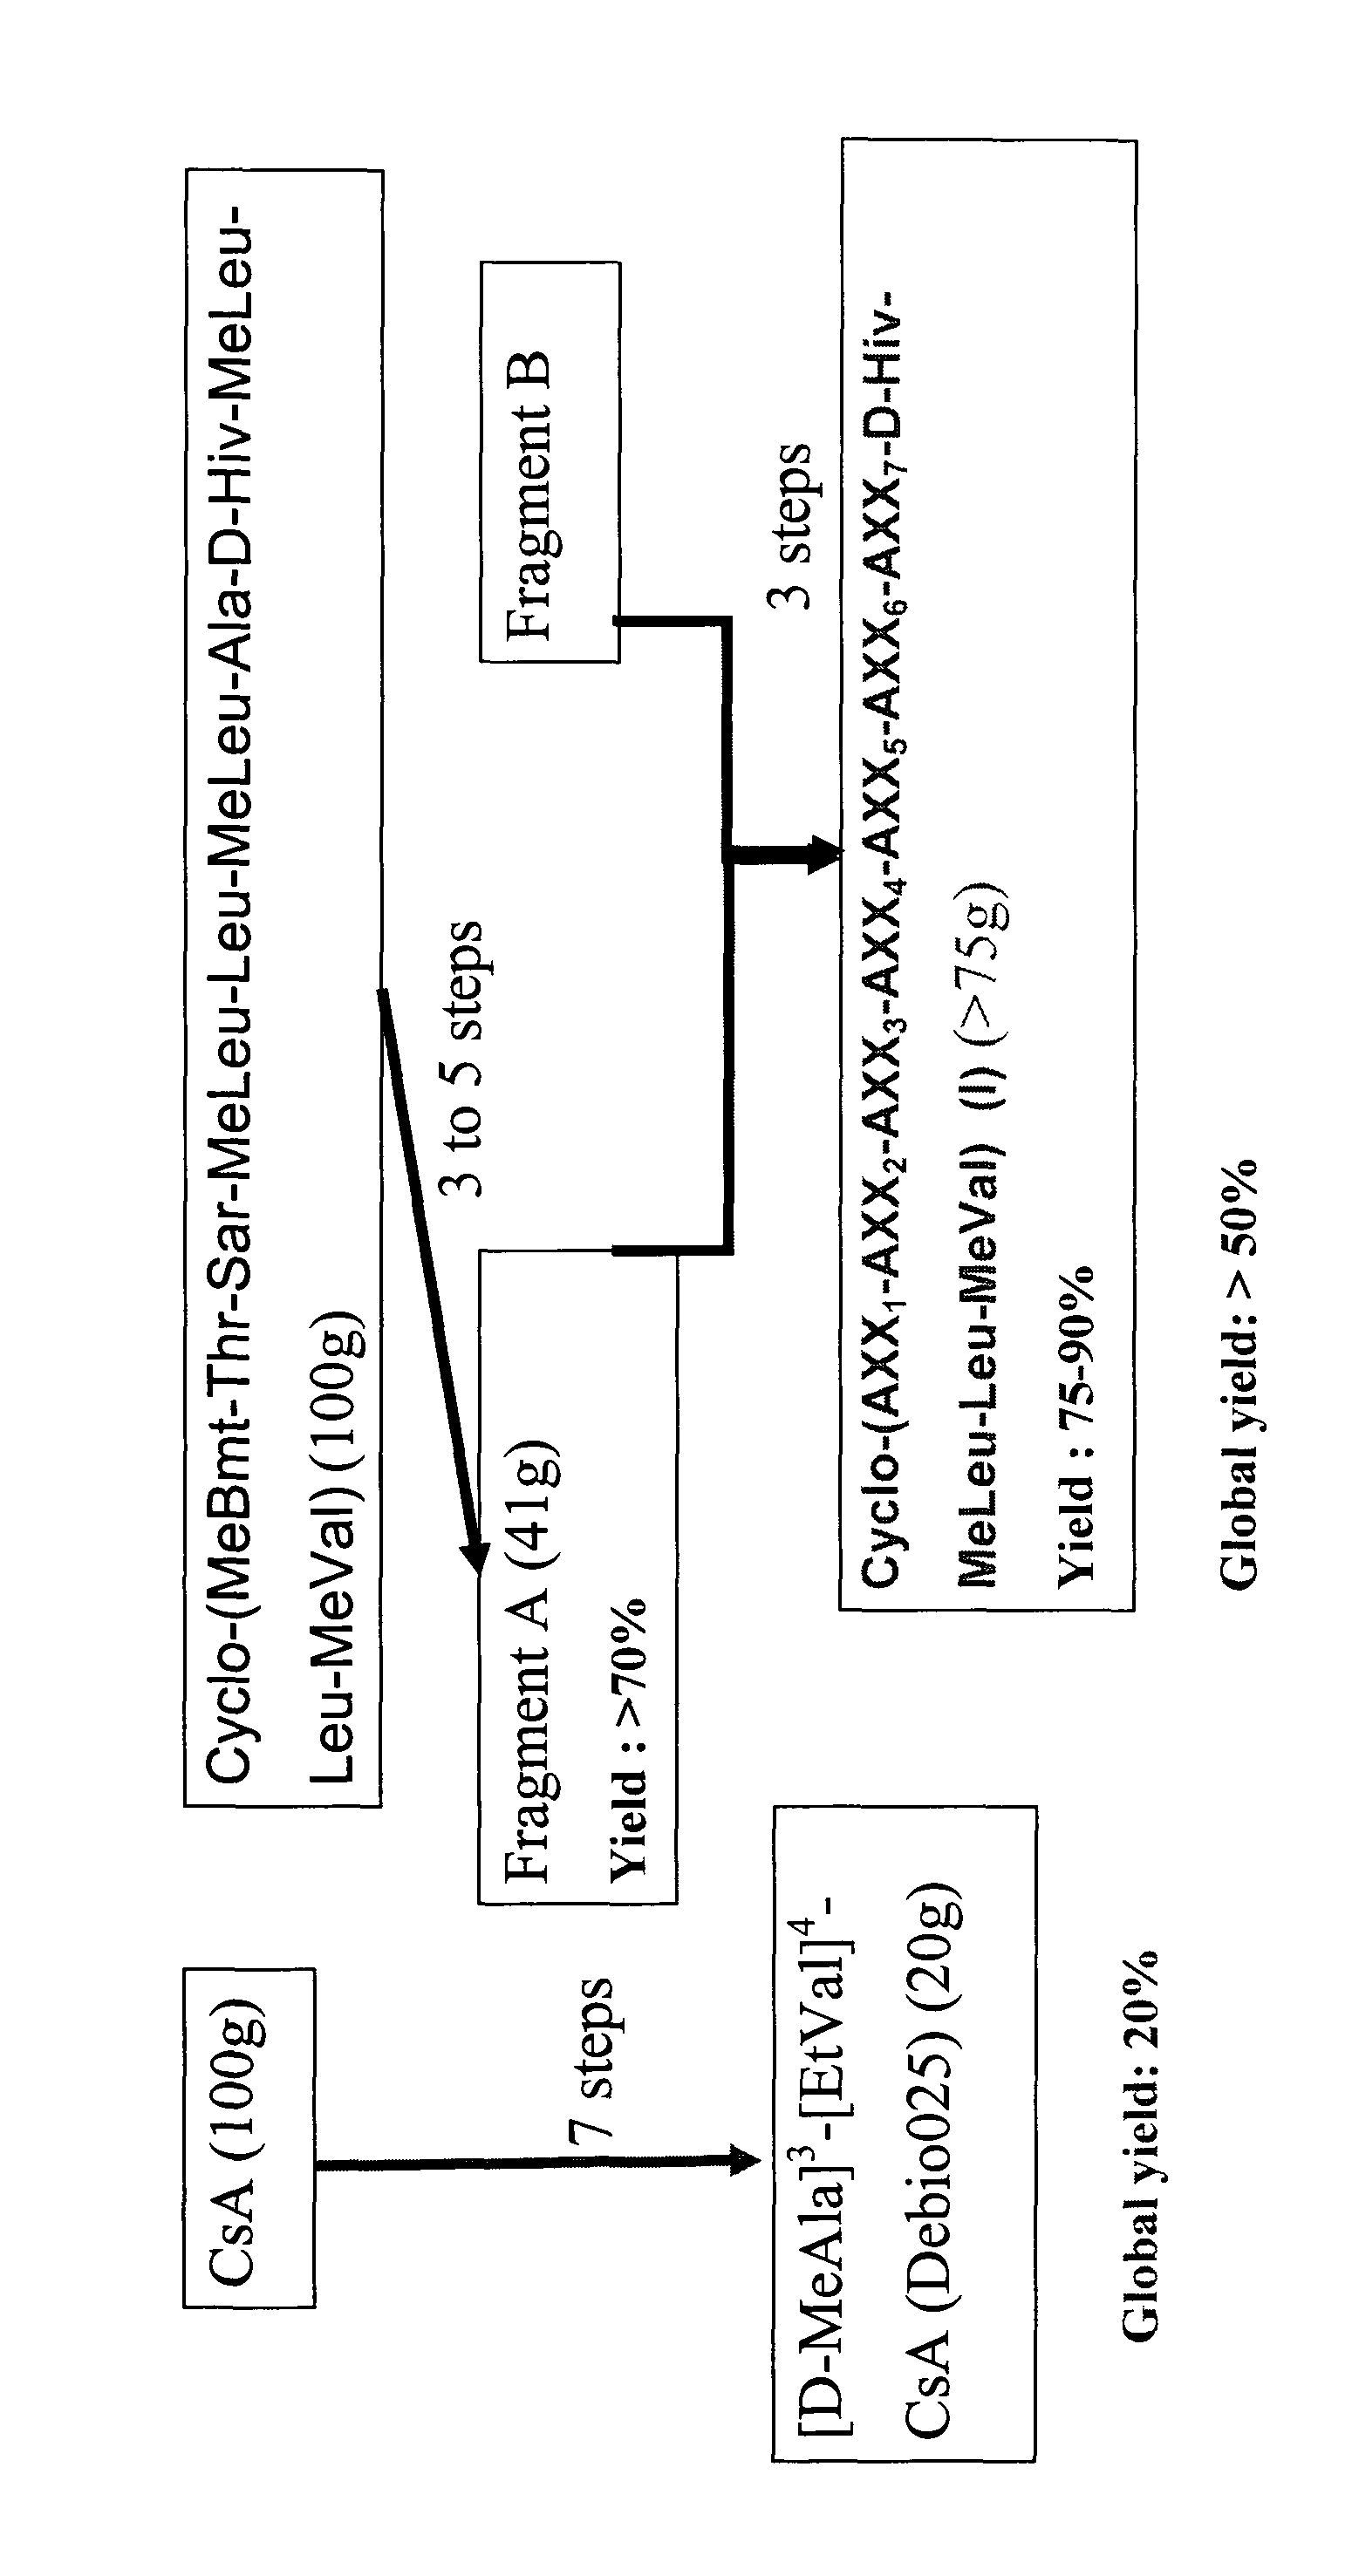 Cycloundecadepsipeptide compounds and use of said compounds as a medicament